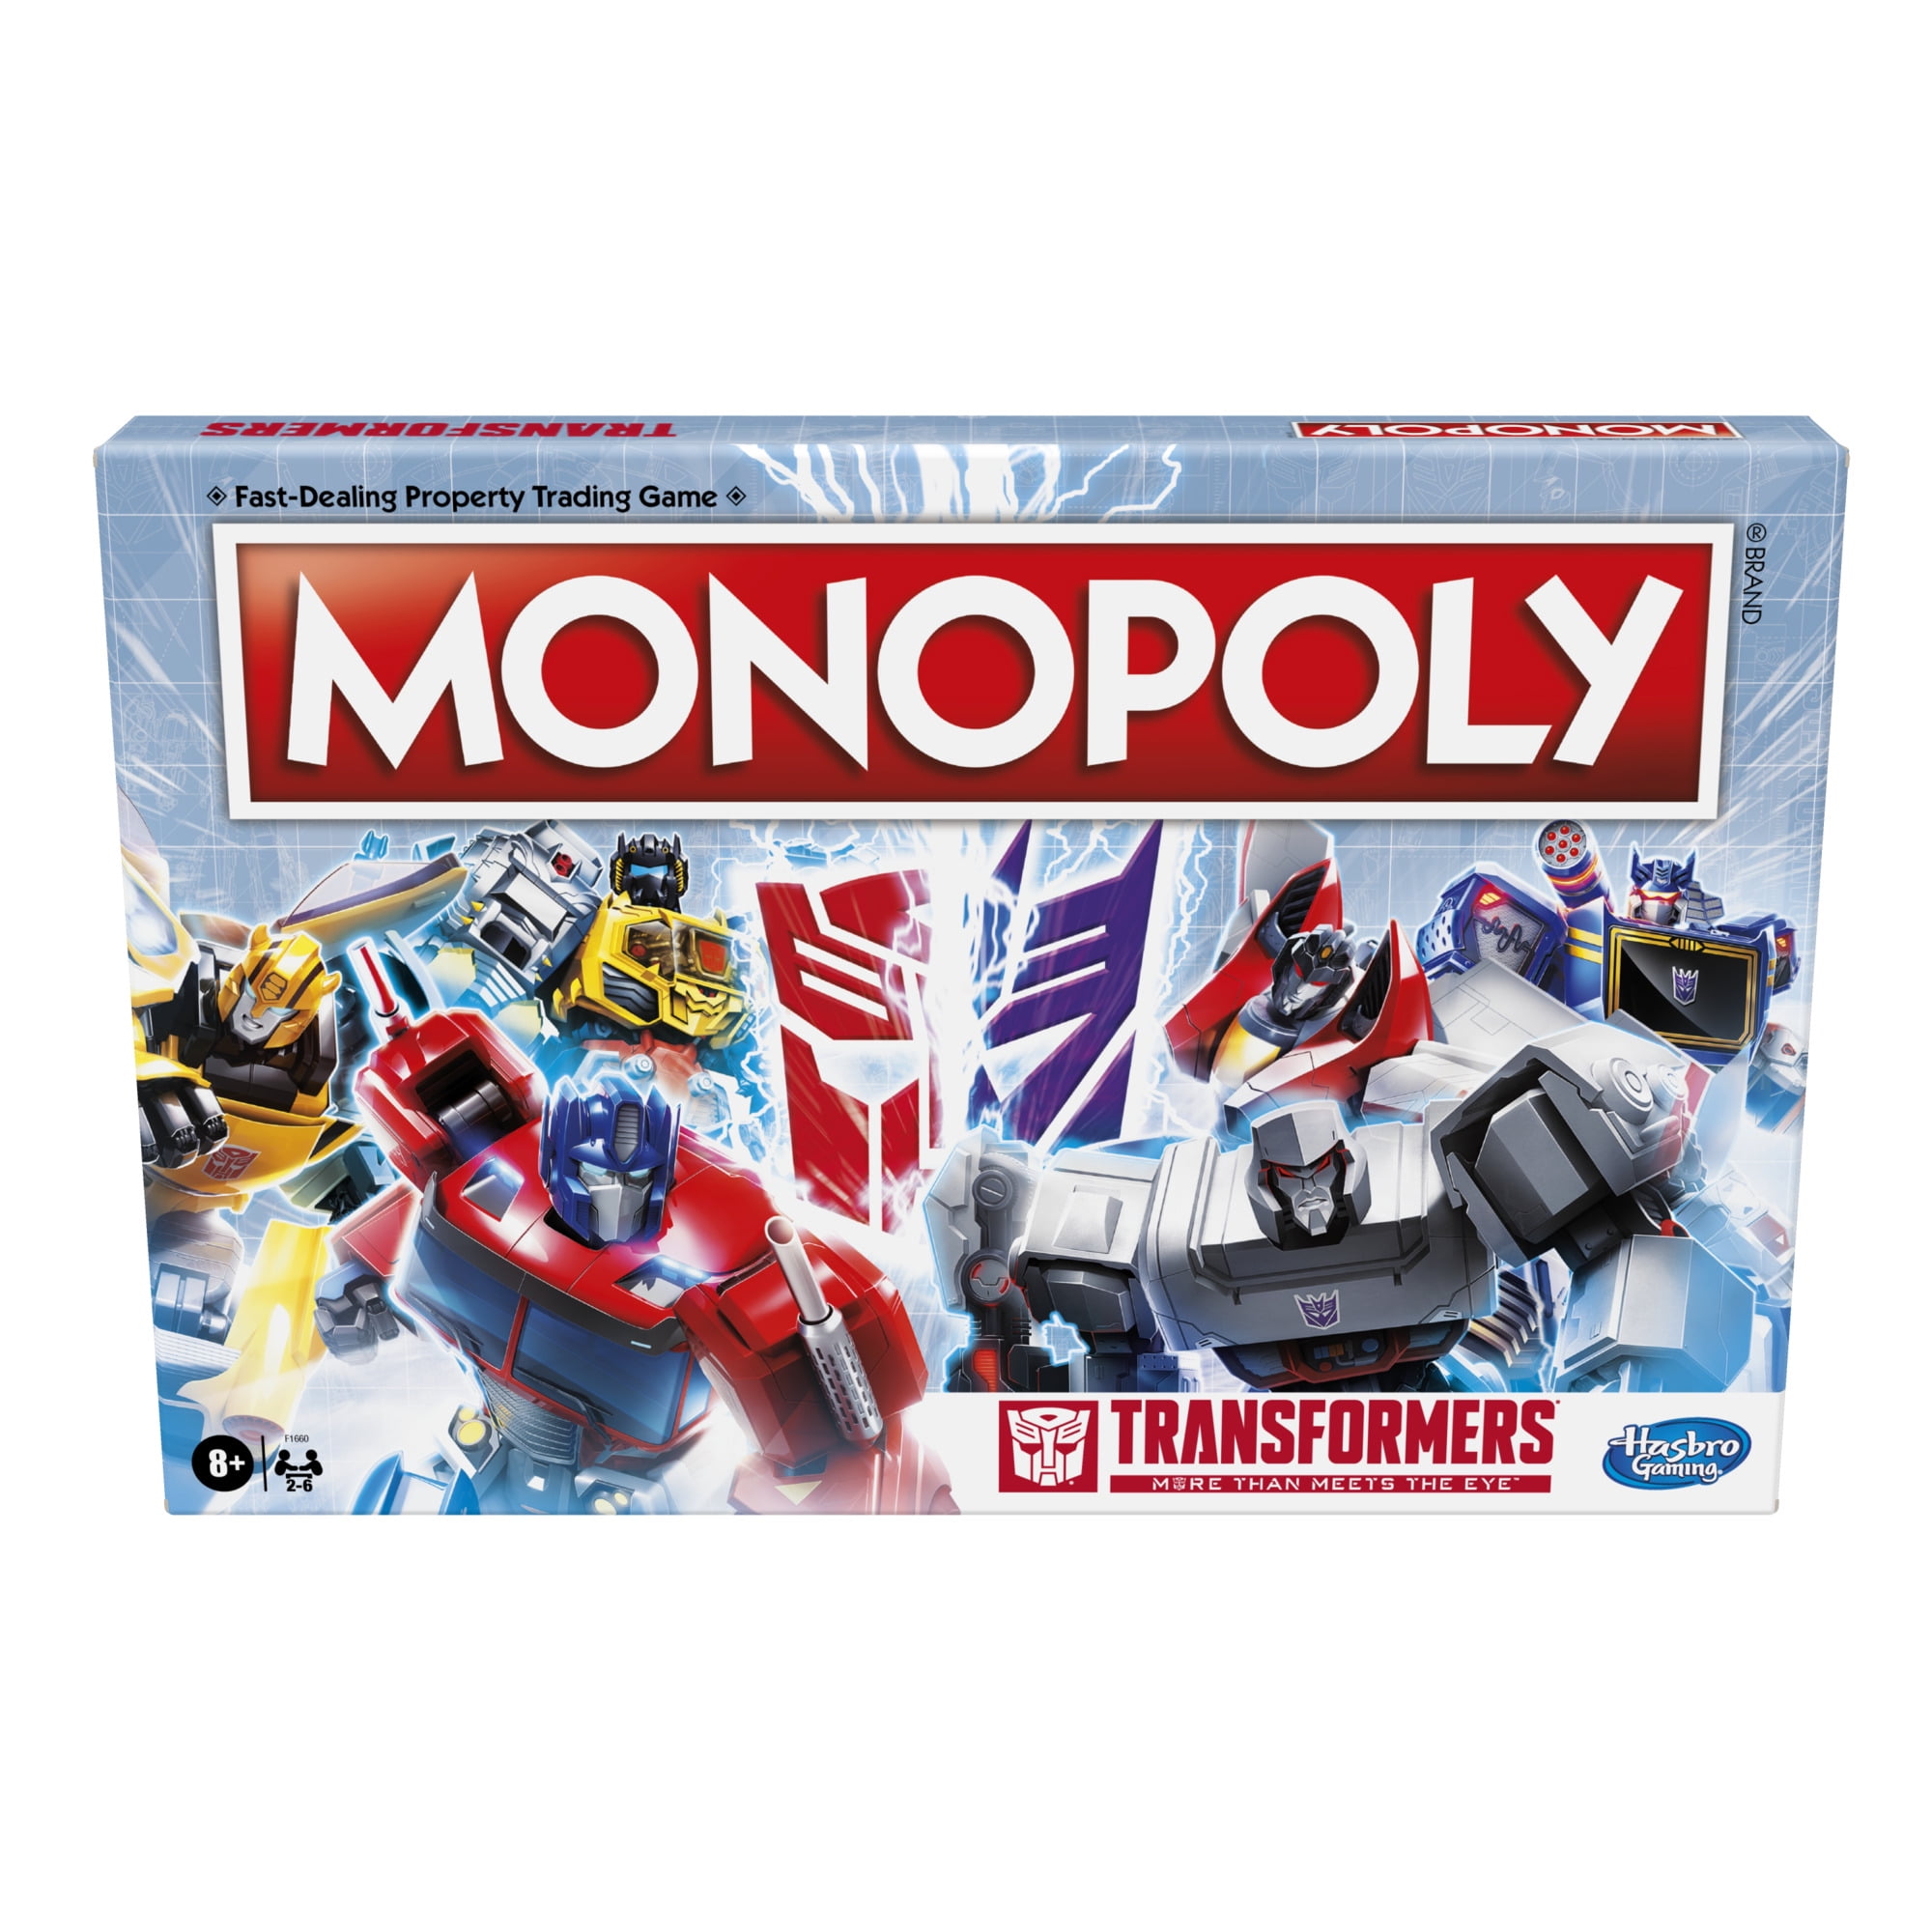 Hasbro Parker Brothers Monopoly Transformers Collector's Edition 2007 for sale online 